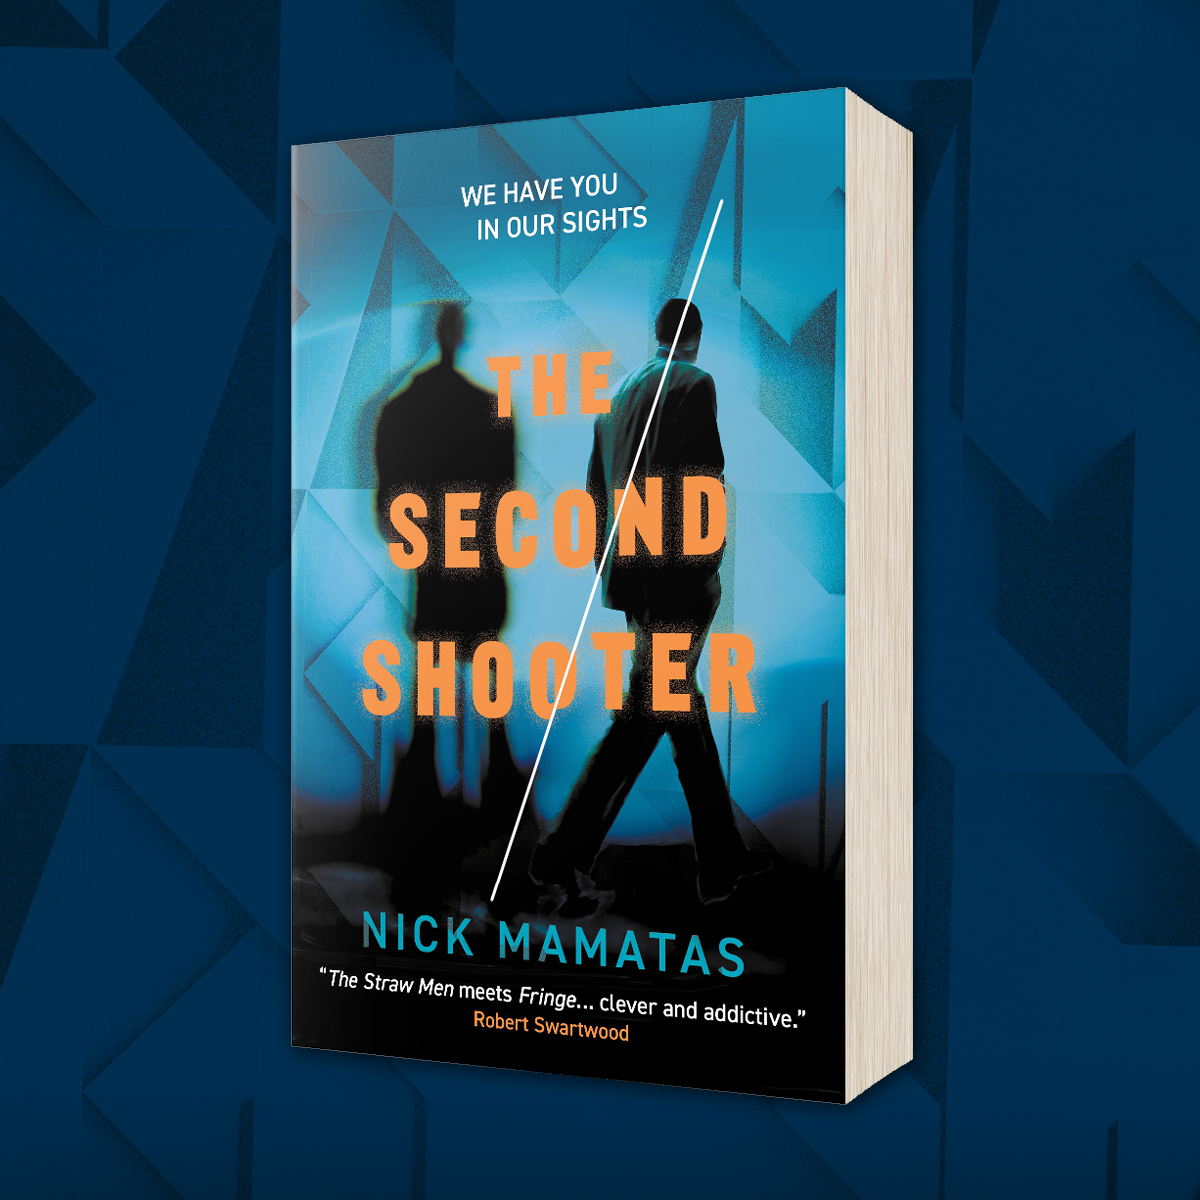 OUT NOW: The Second Shooter by Nick Mamatas!